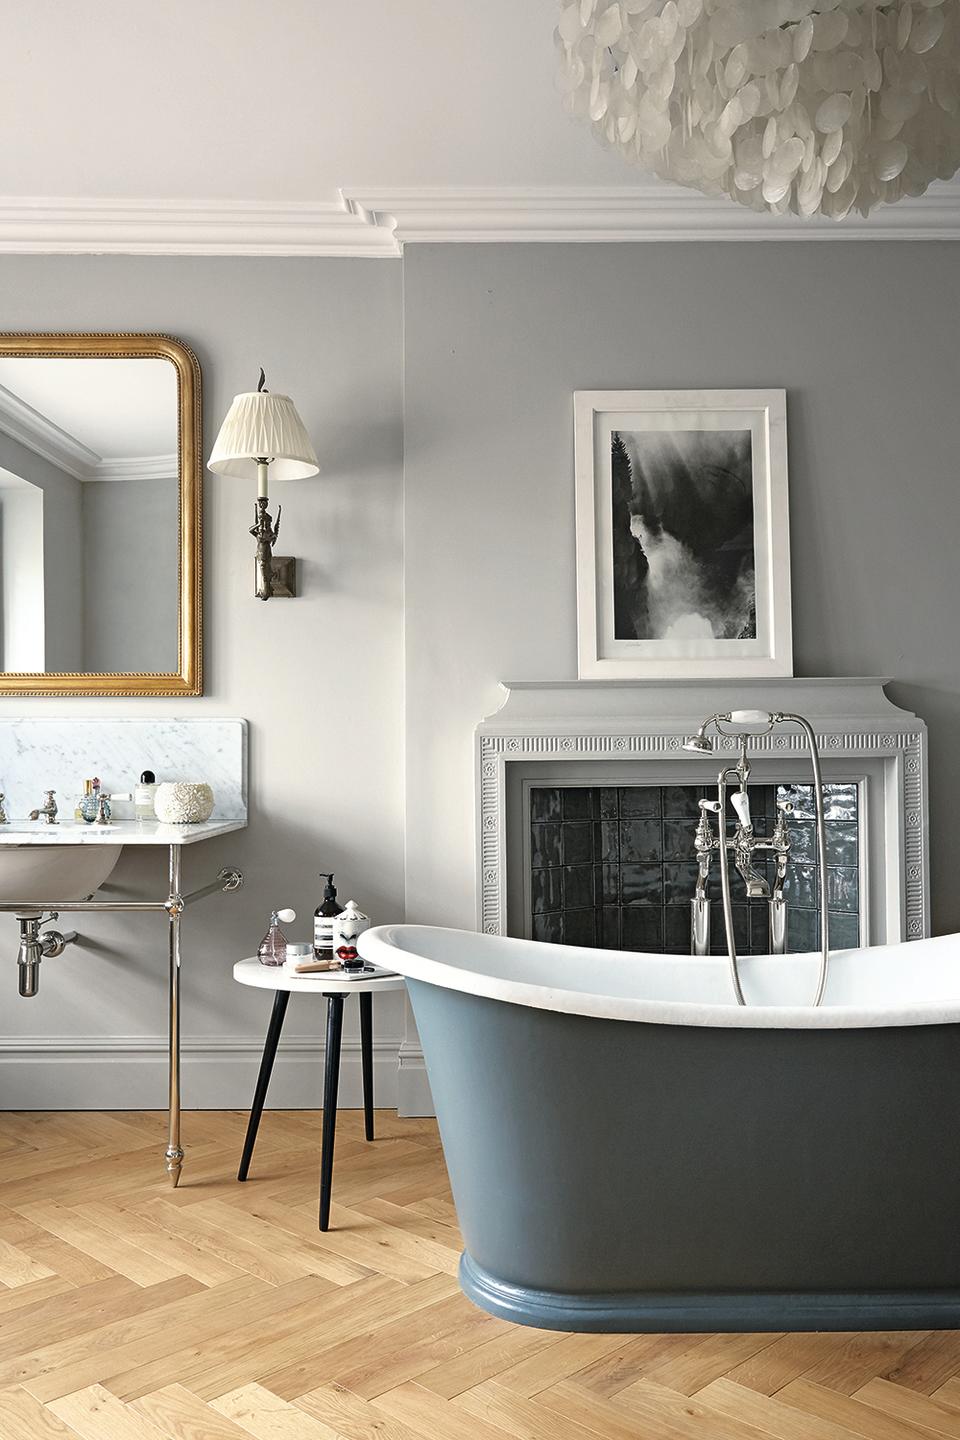 <p> In lieu of a shower, a claw tub or a stock tank are options that blend beautifully with modern farmhouses. Laura Mooney, Owner and Head of Creative at The Mohicans Treehouse resort suggests choosing a white cast iron tub for a more classic approach, or go with a copper sitting tub or repurposed stock tank as alternatives for a bolder scheme. </p>